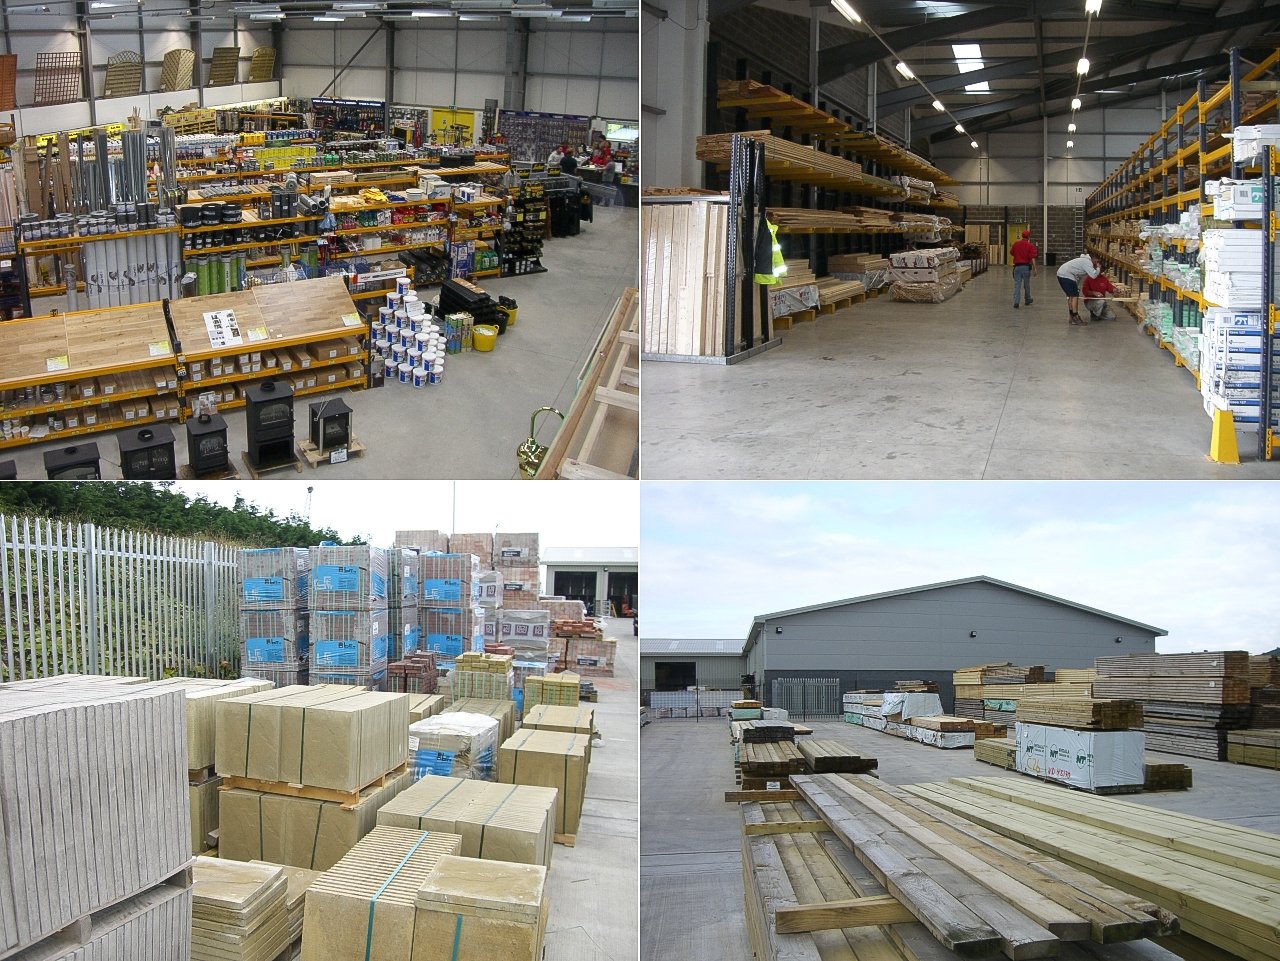 Neath timber and builders merchants,